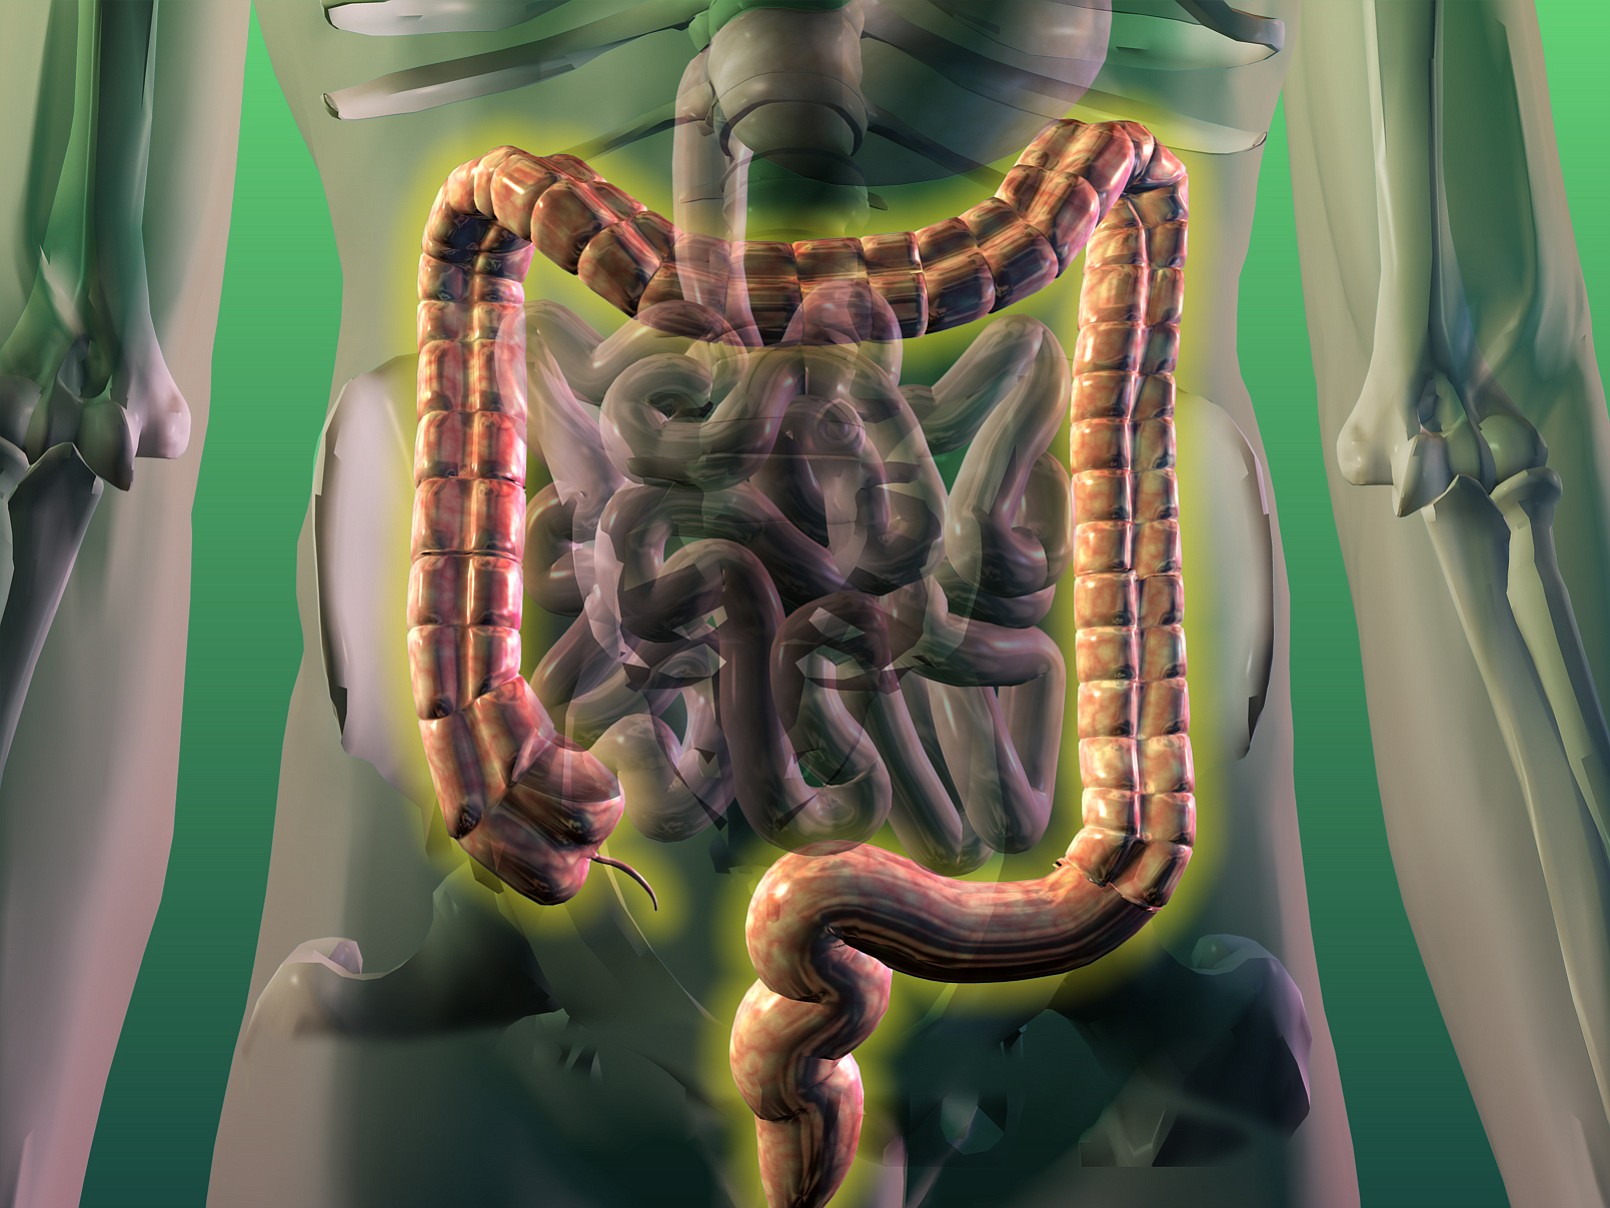 McClatchy-Tribune files
Colon cancer is cancer of the large intestine, or colon, which is the lower part of the digestive system. Rectal cancer is cancer of the last several inches of the colon. Together, they're often referred to as colorectal cancer.